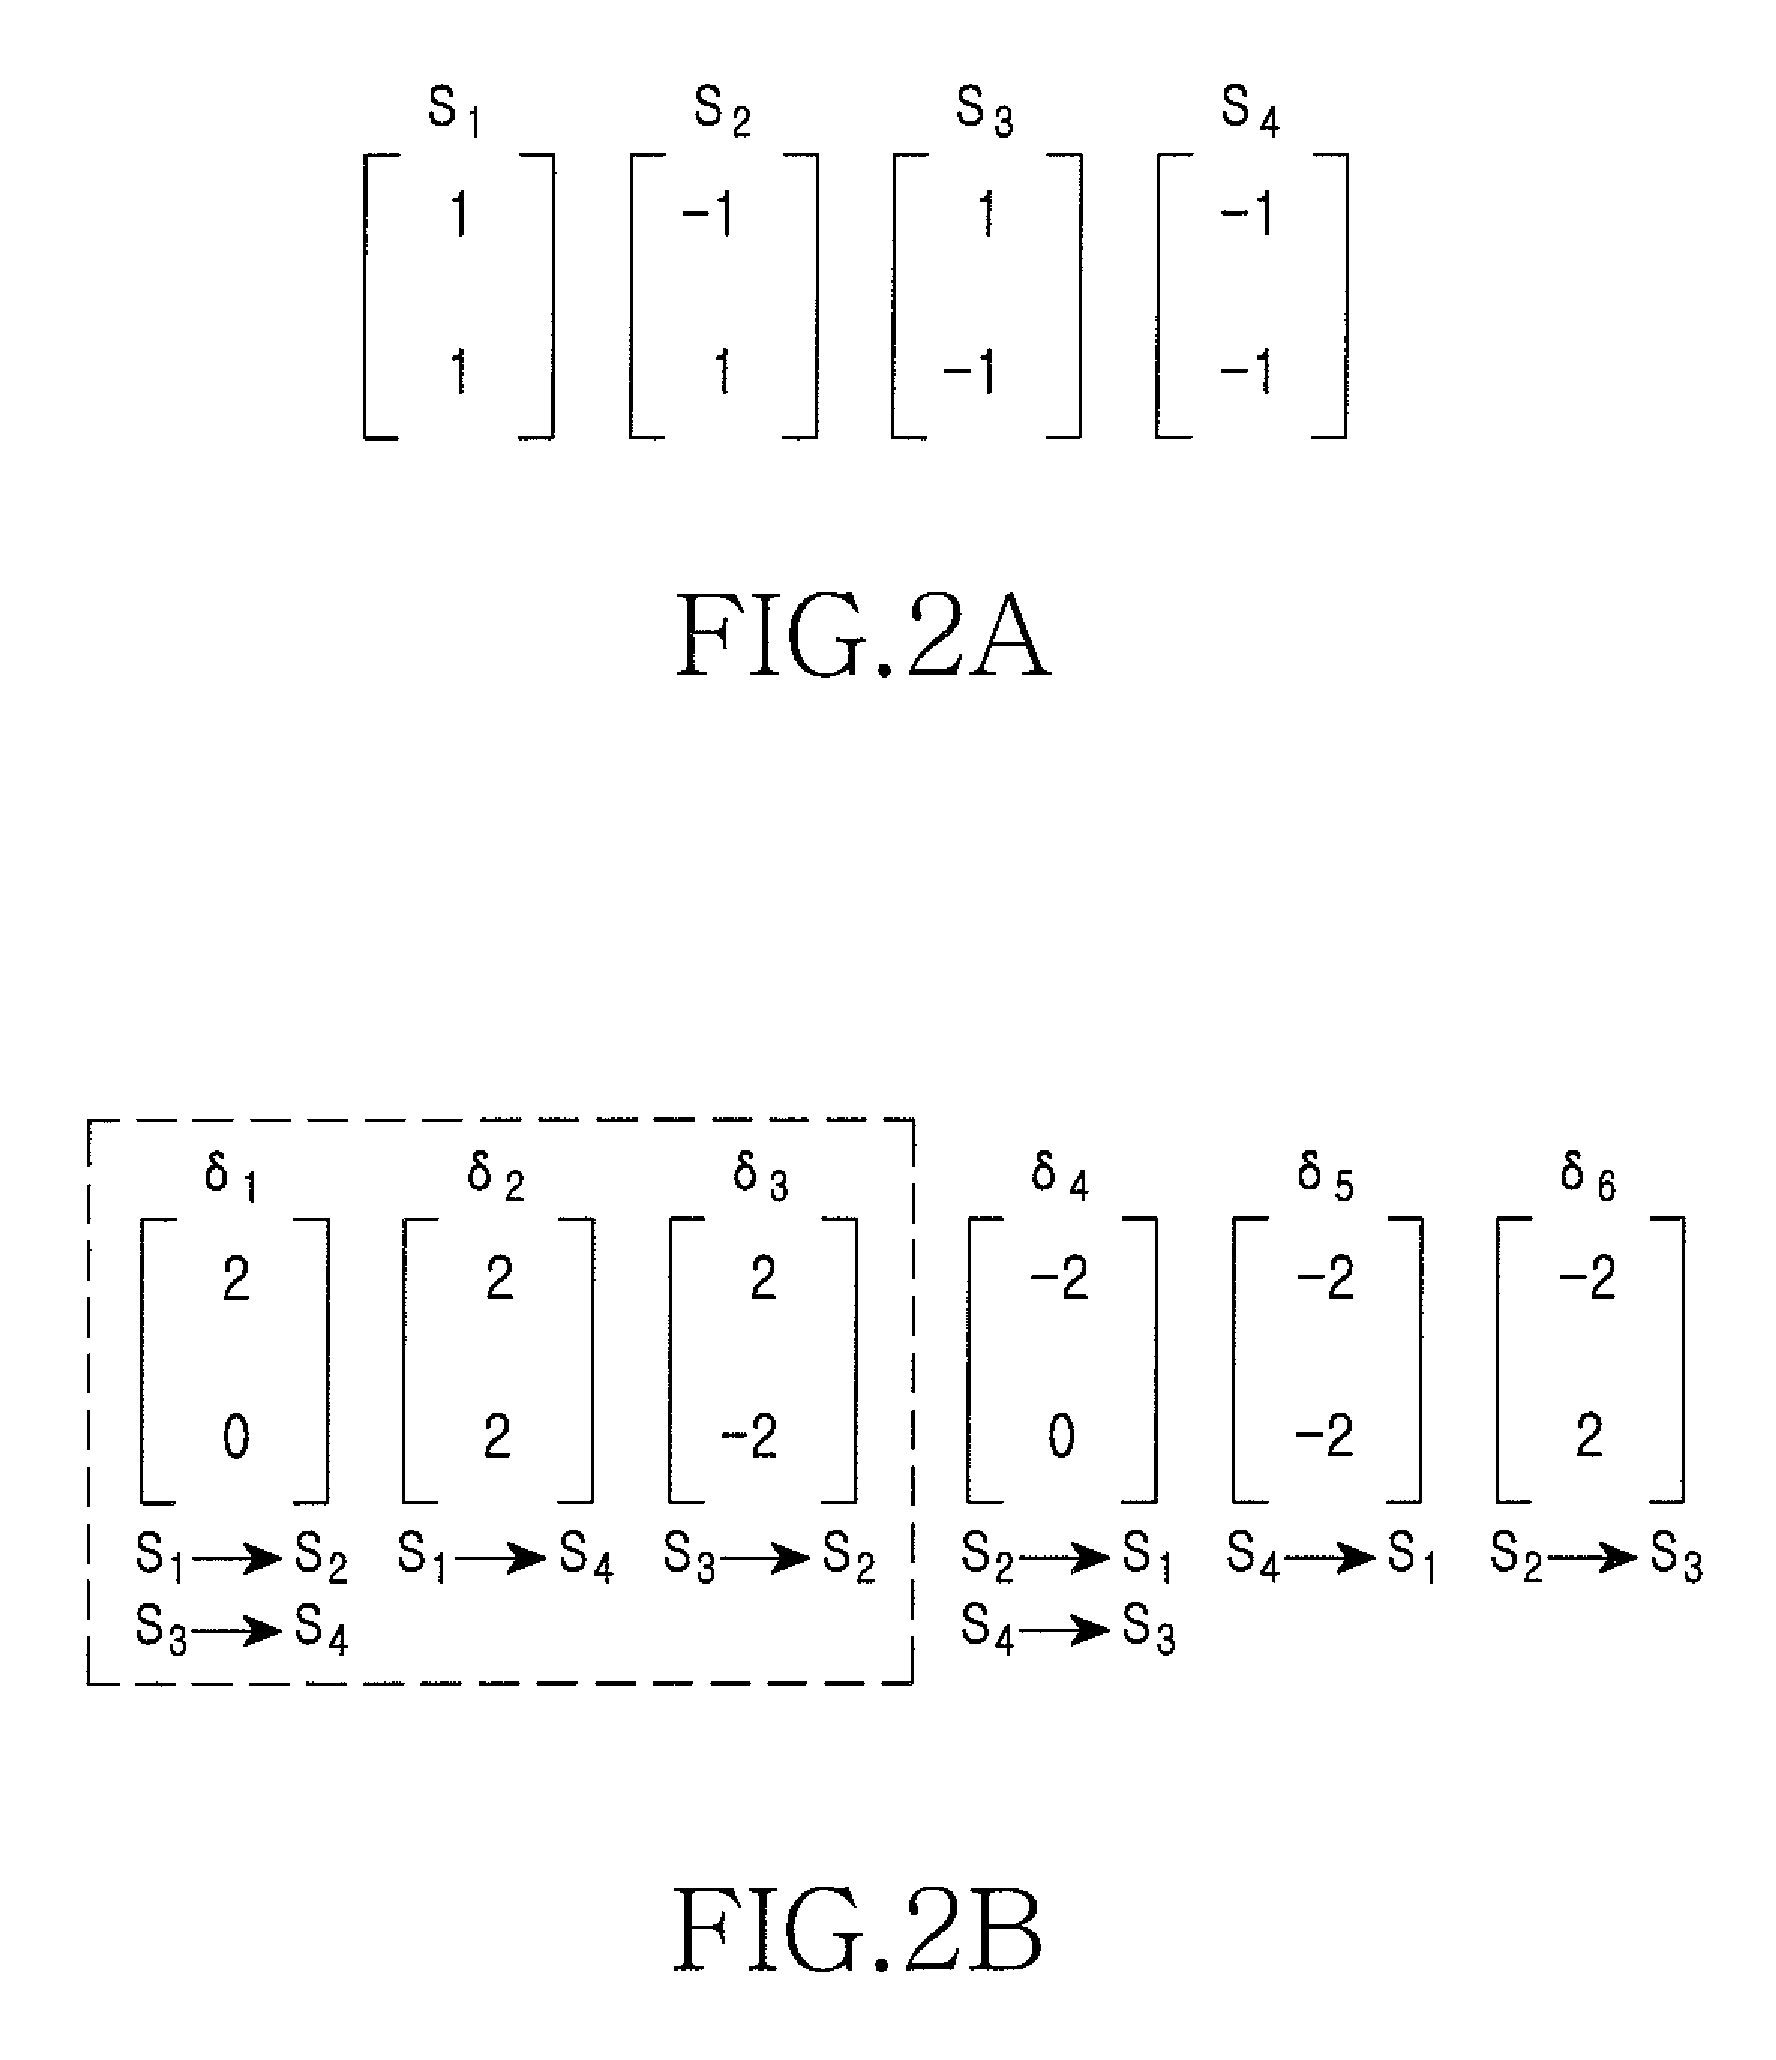 Apparatus and method for generating per stream effective signal to noise ratio in a multiple-input multiple-output wireless communication system